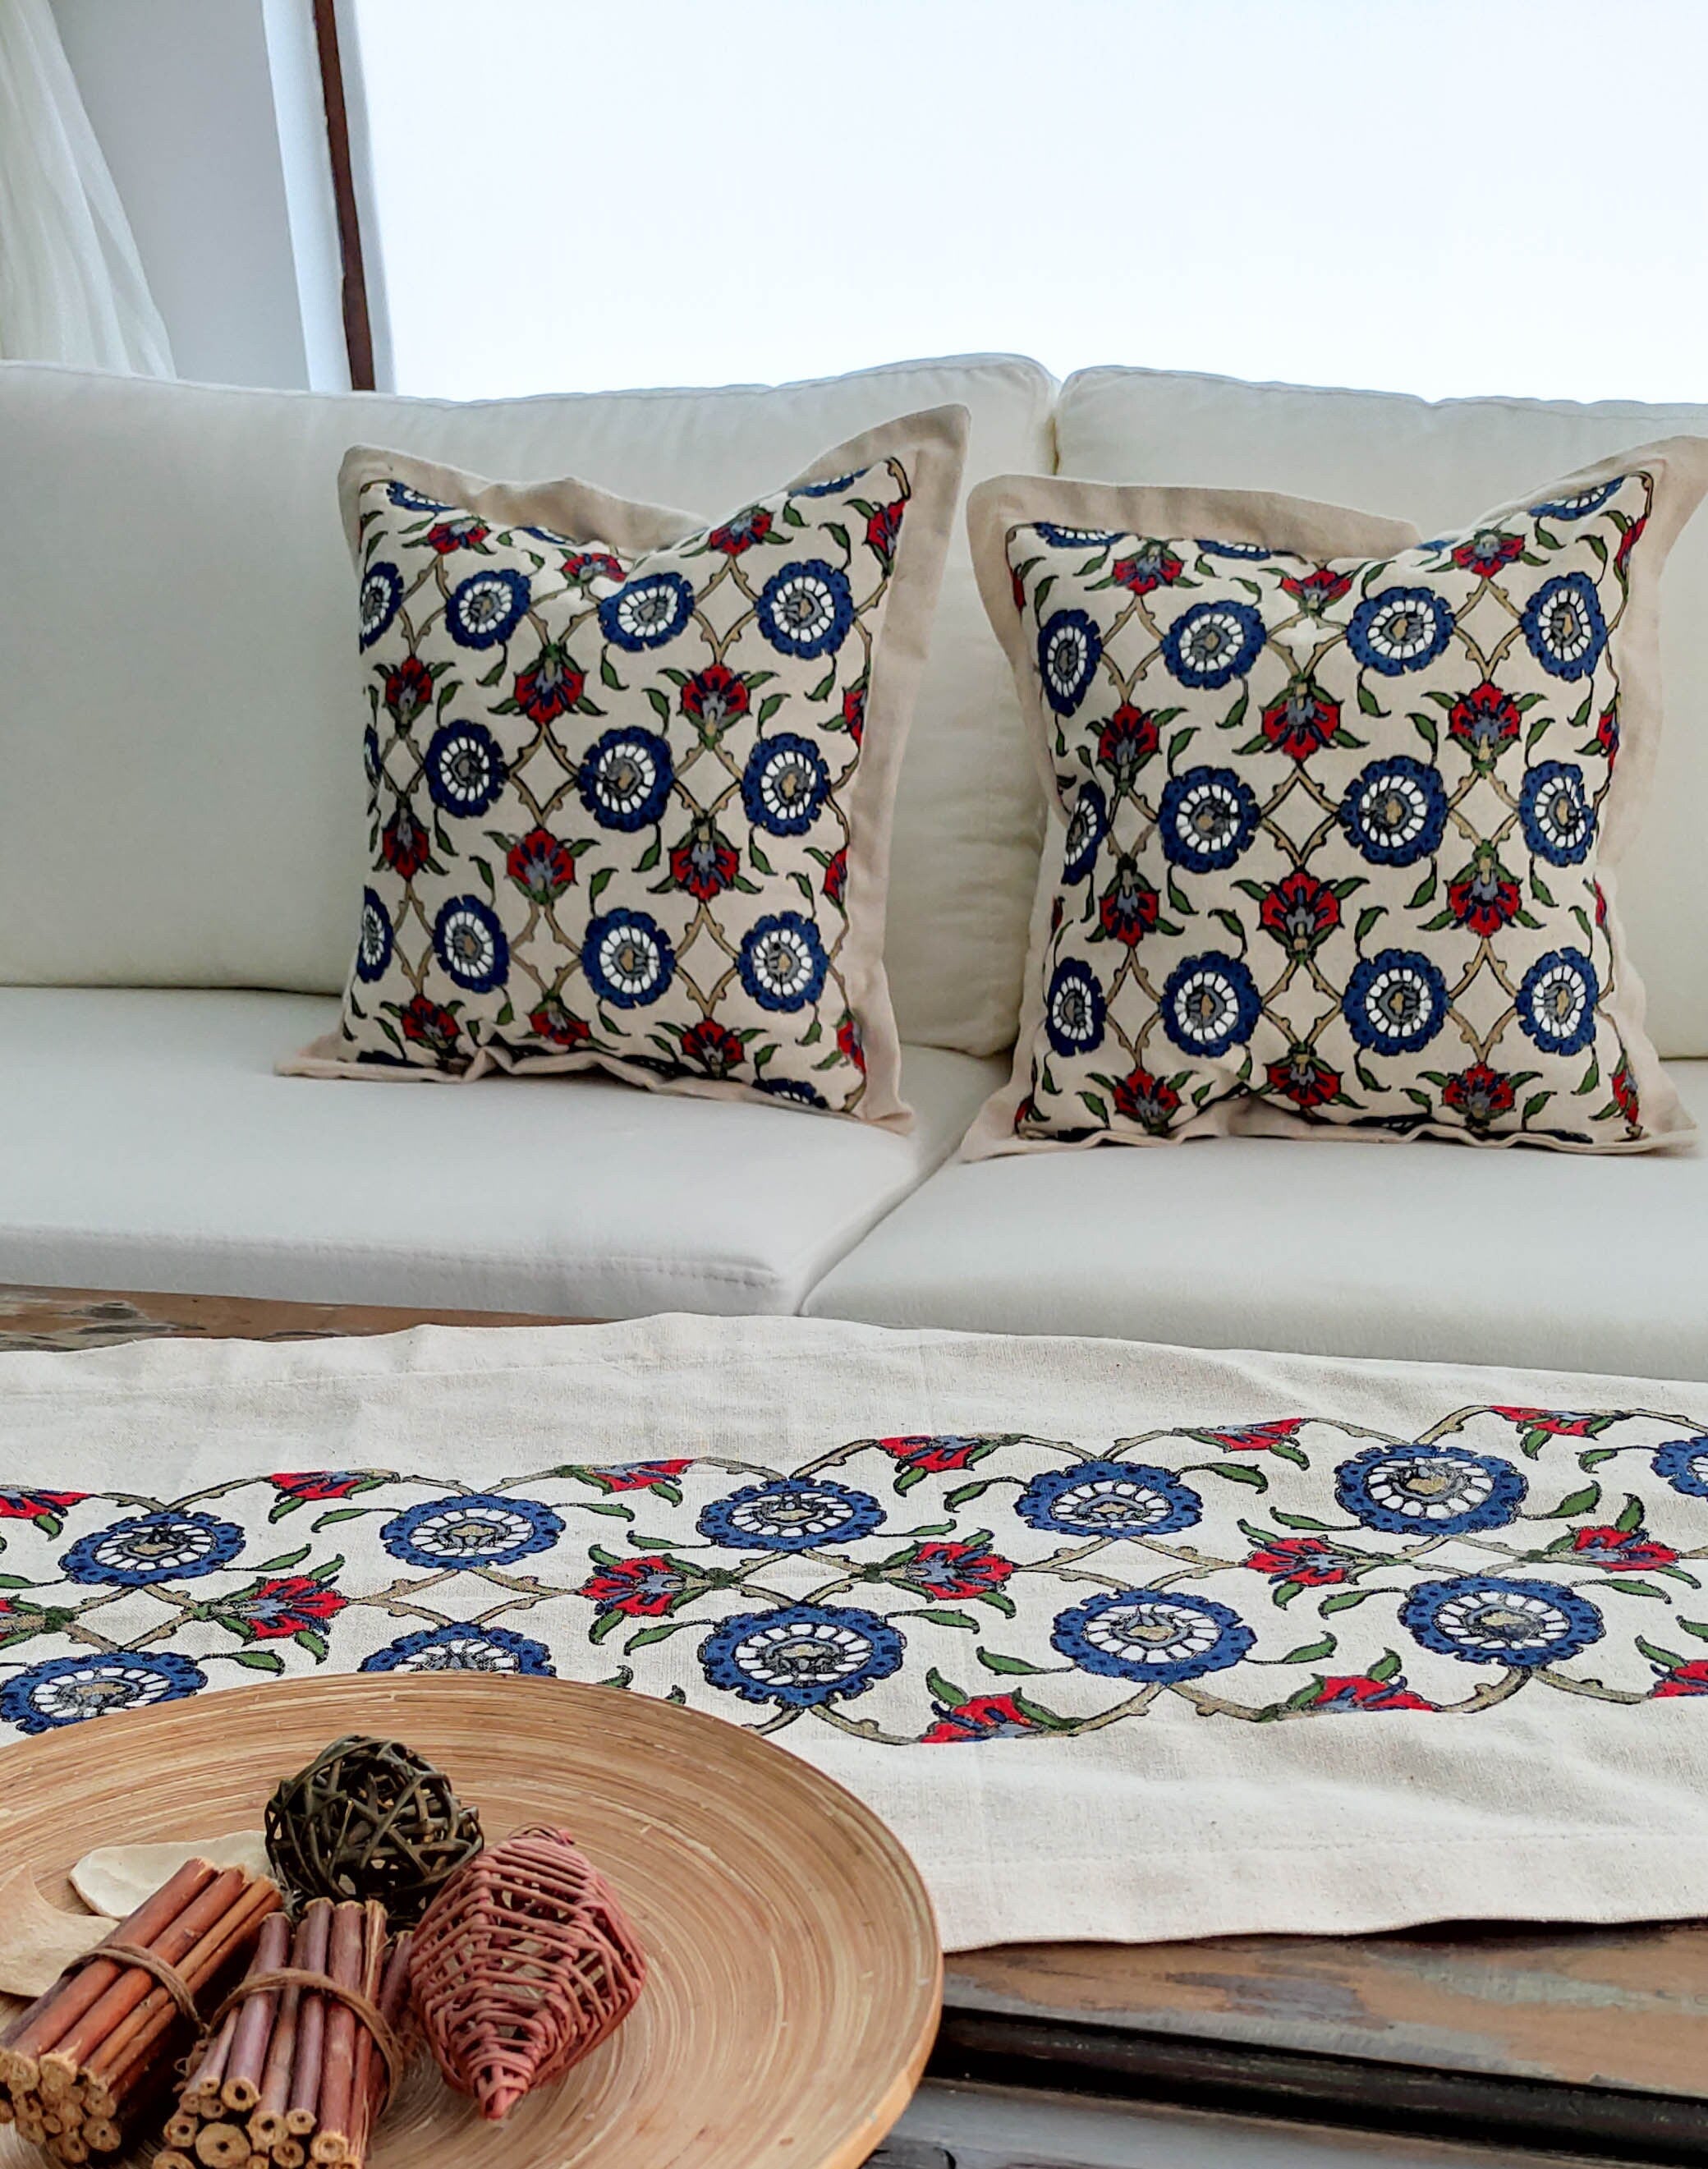 From everyday dining to casual get-together, make a statement with this adorable table runners and pillow case set.